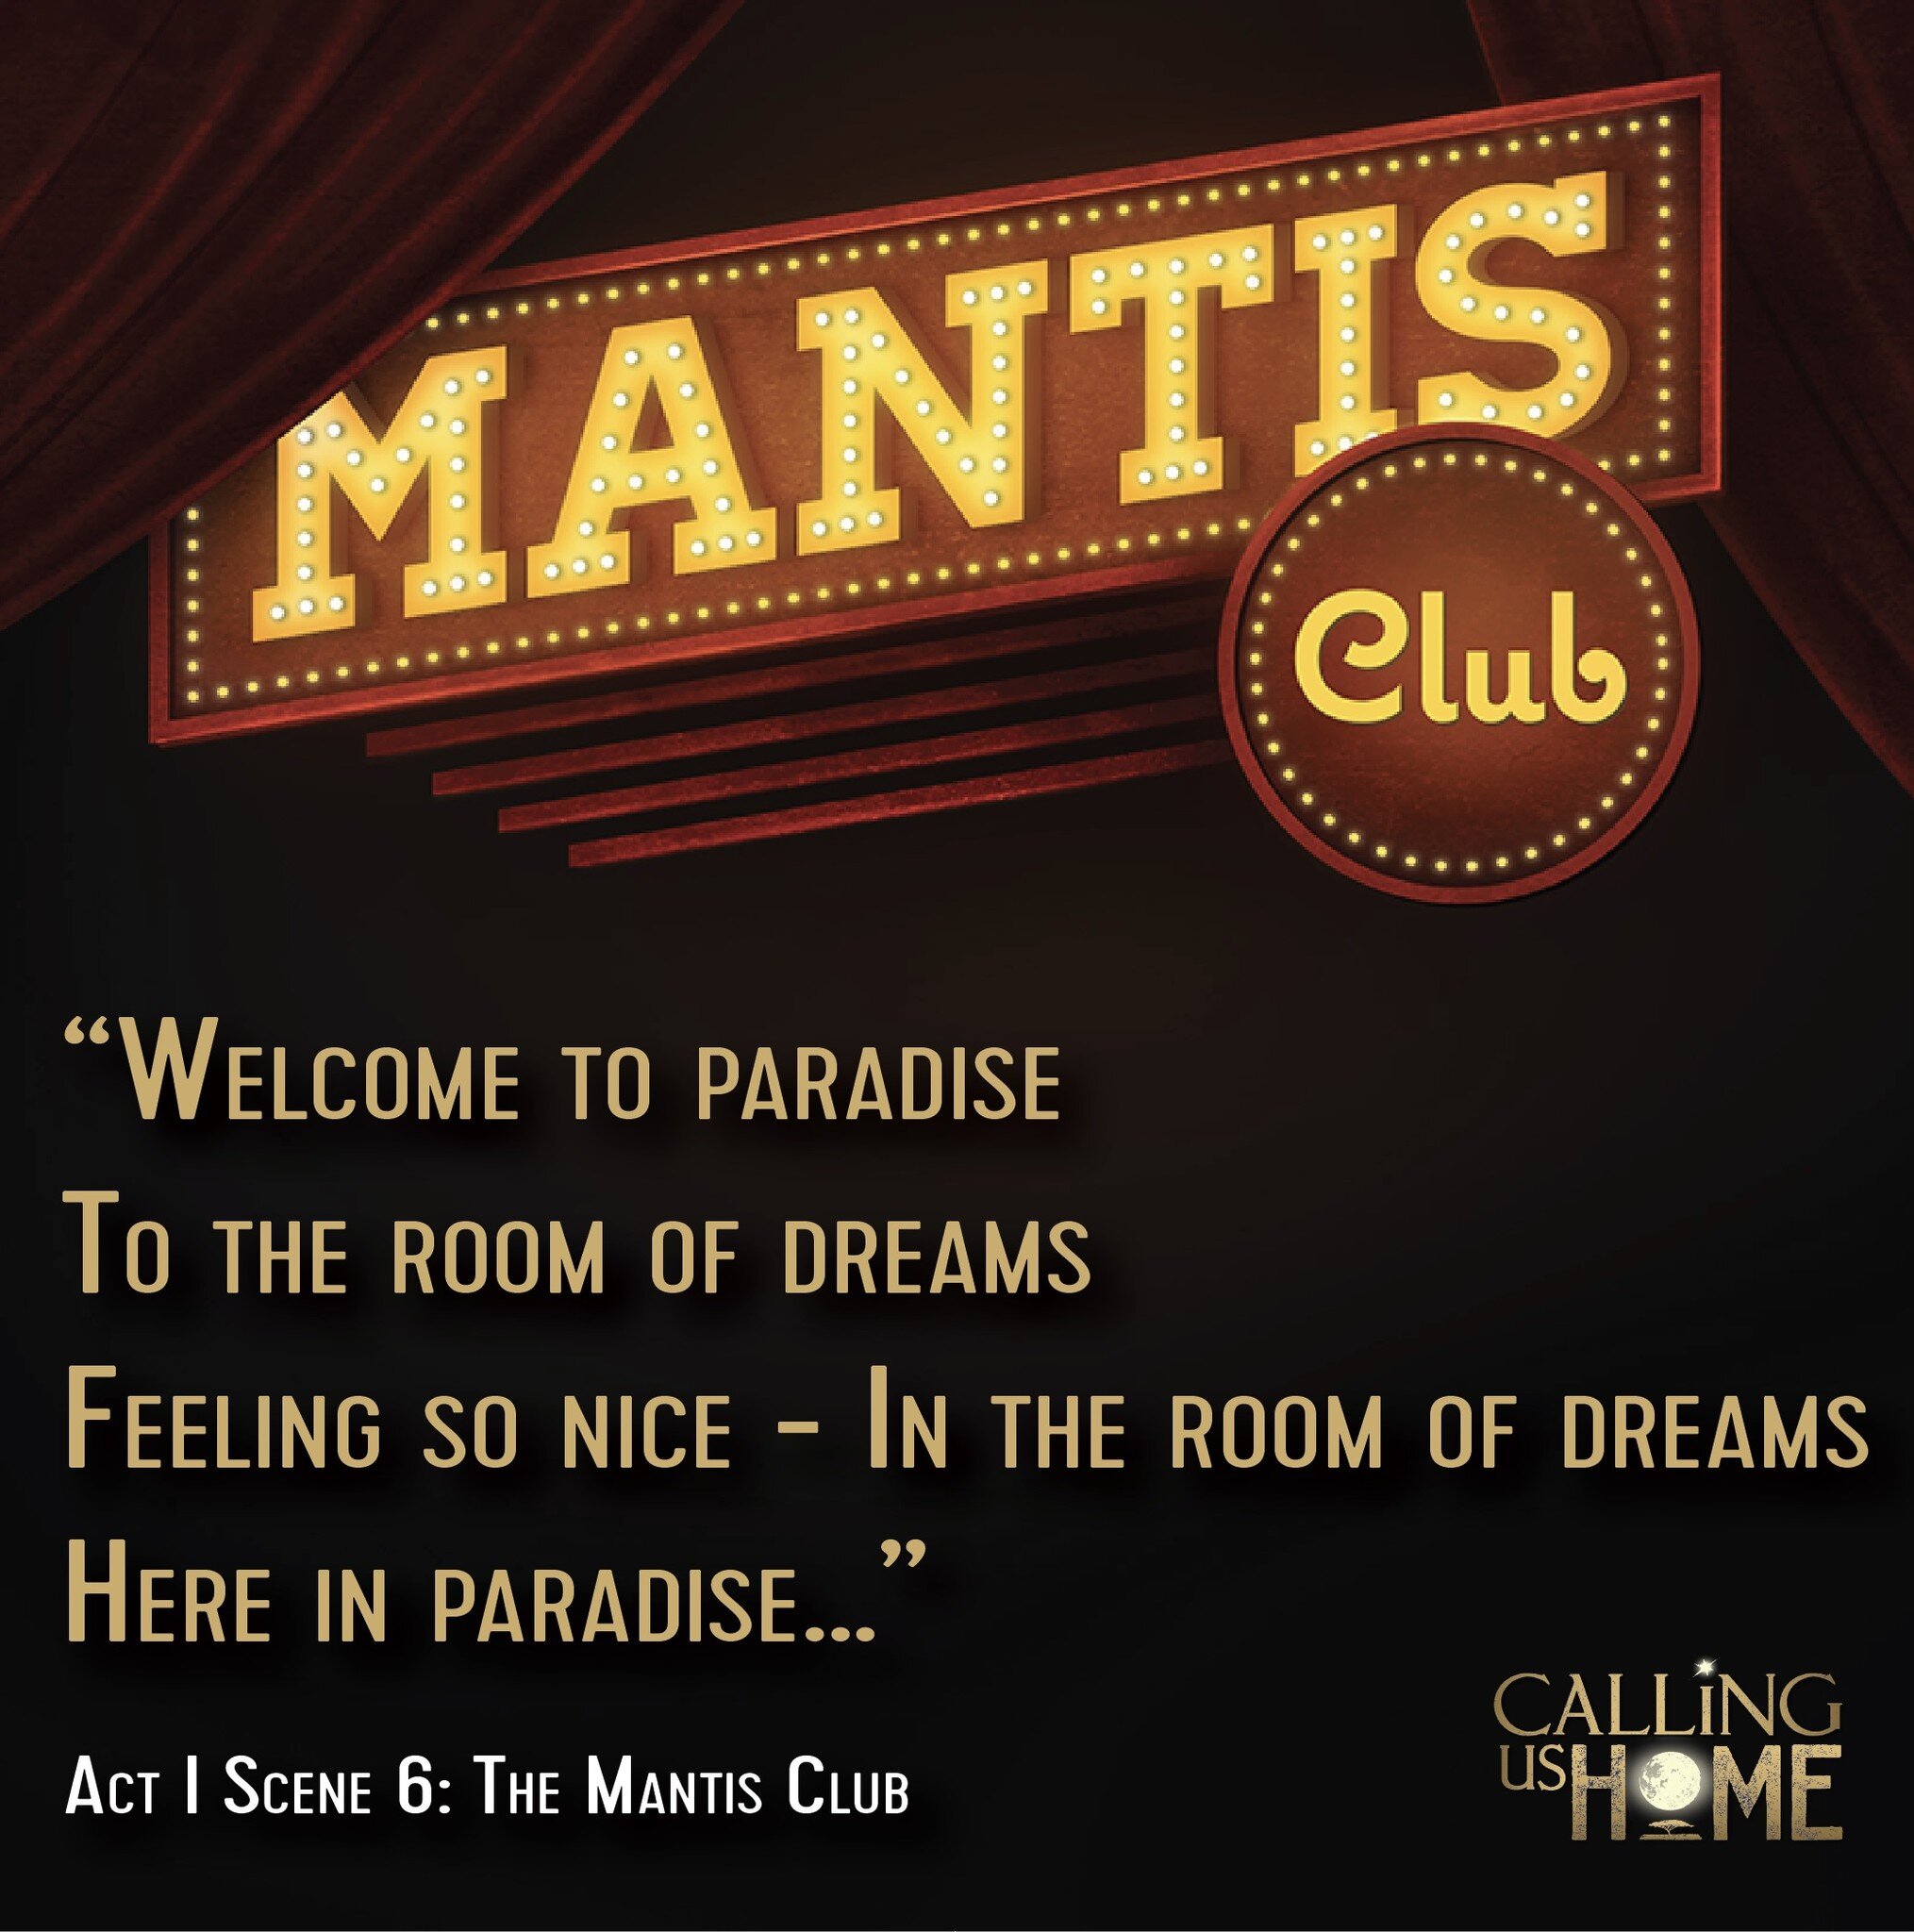 Welcome to The Mantis Club! 
&ldquo;The room of dreams&hellip;&rdquo;

ISABELLA&rsquo;s dream is to be a singer&hellip; Will &lsquo;The Mantis Club&rsquo; be the place where her dreams come true, or will the forces of darkness prevail?

#CallingUsHom